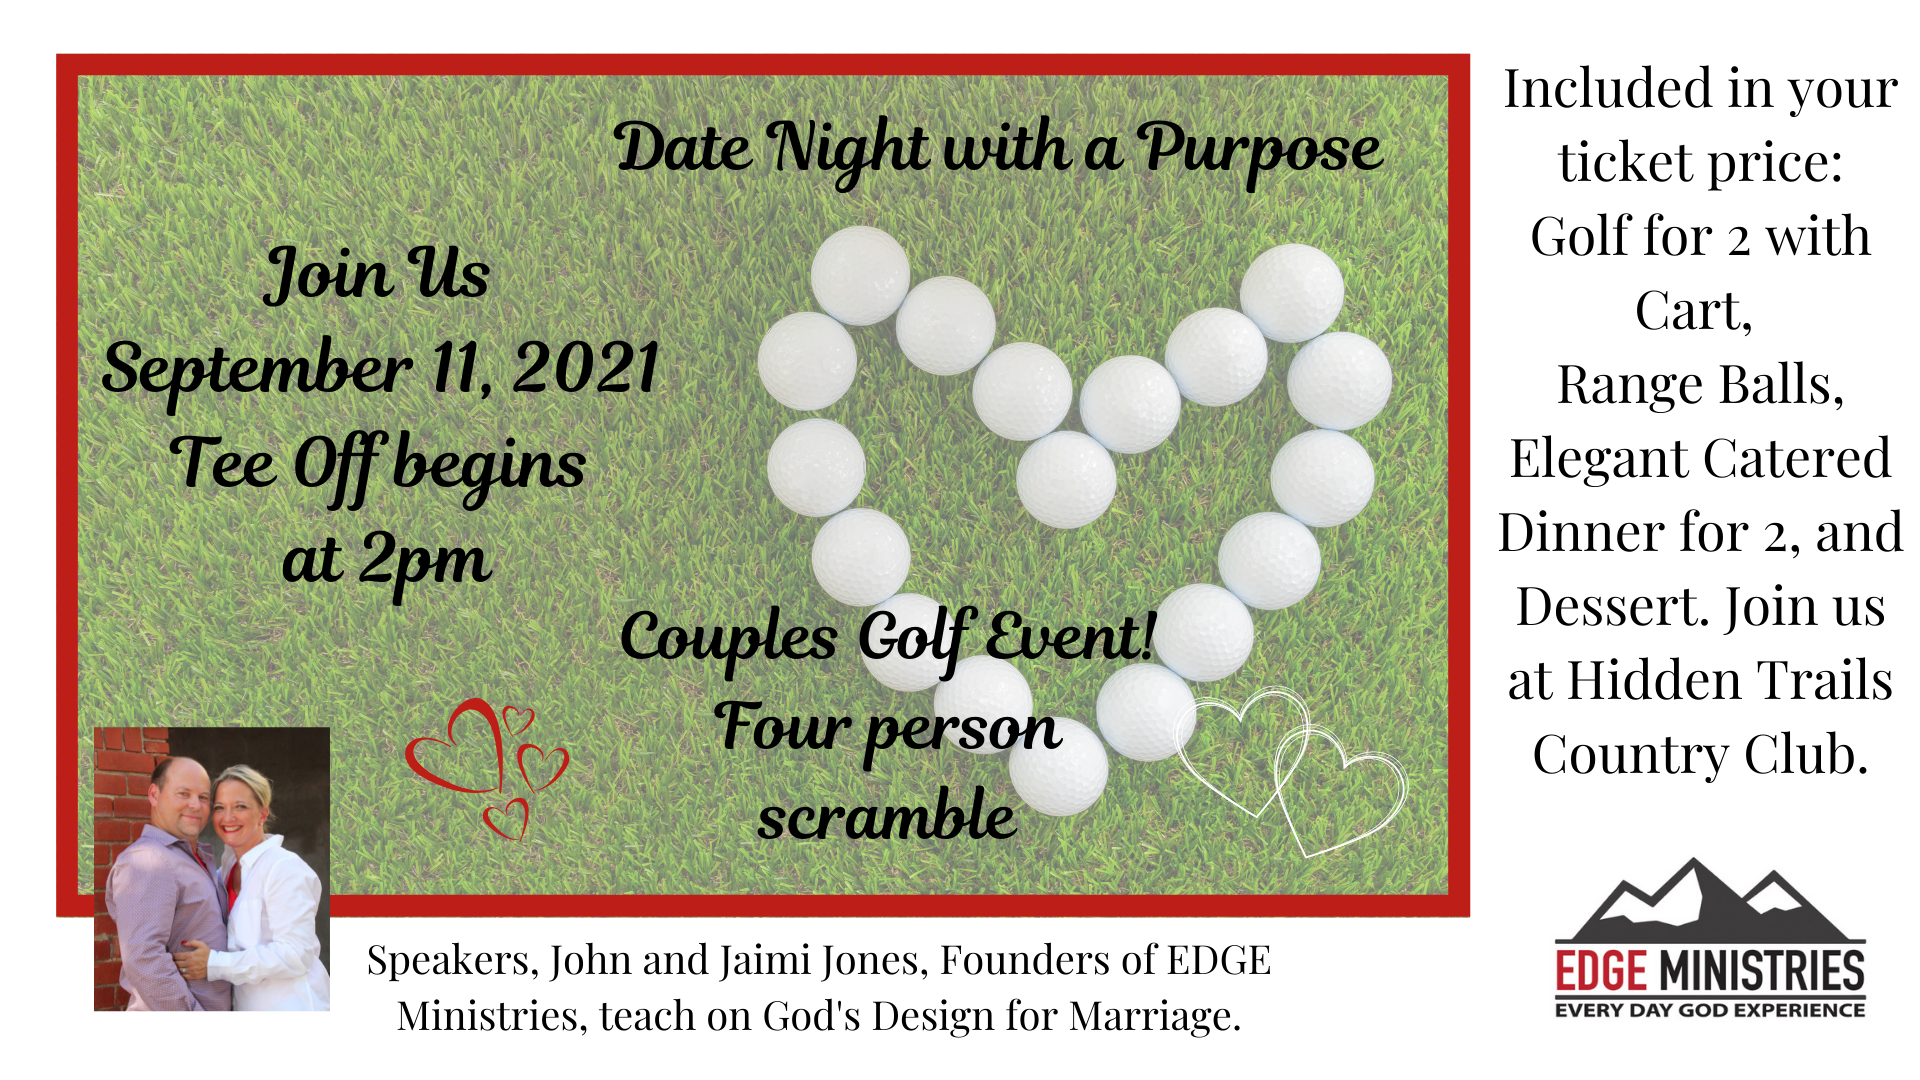 Date Night with a Purpose: Couples Golf Event